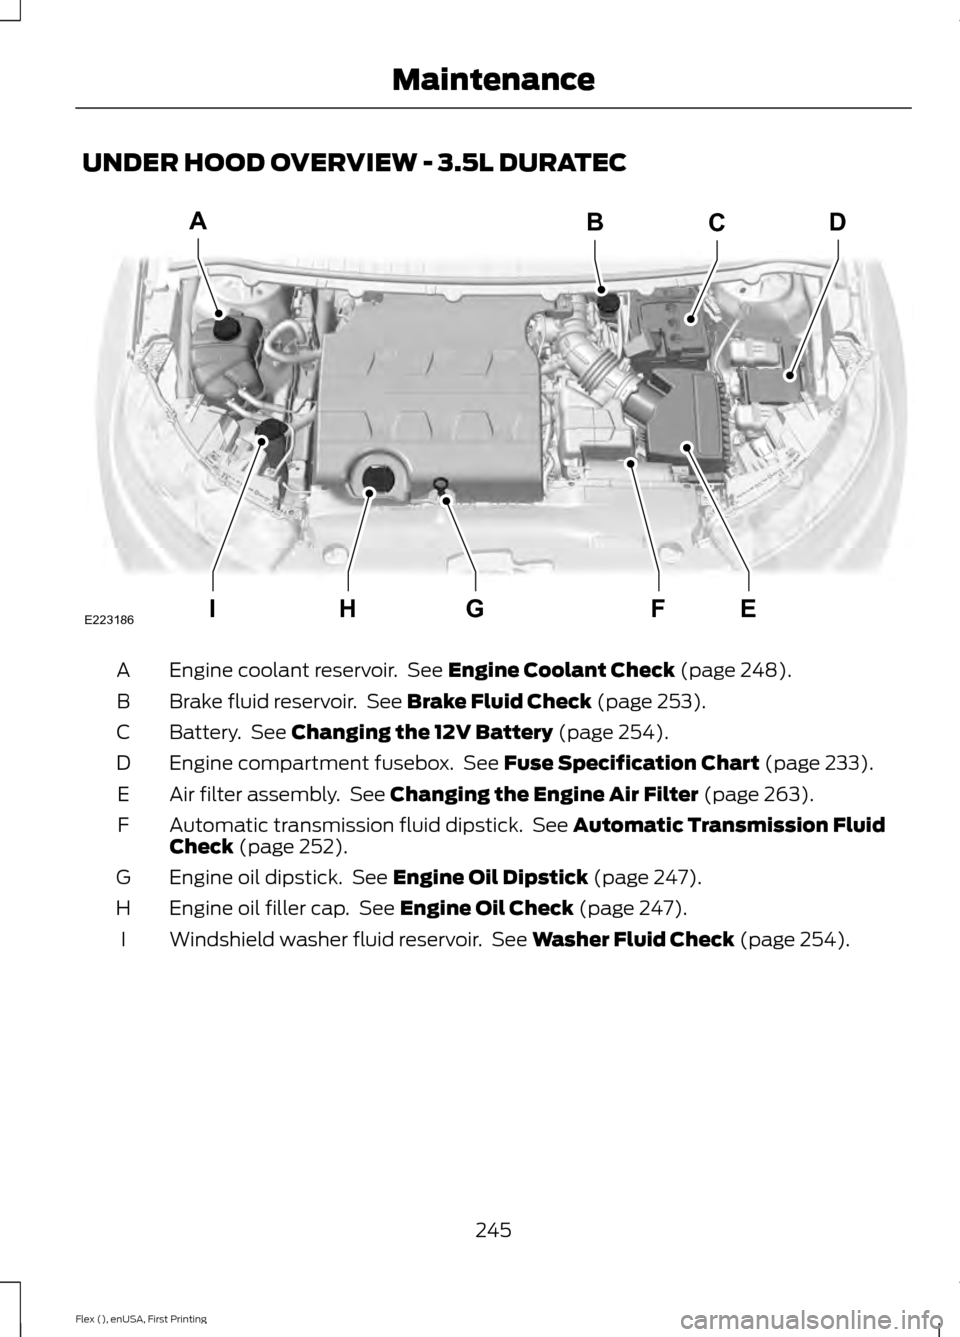 FORD FLEX 2016 1.G Owners Manual UNDER HOOD OVERVIEW - 3.5L DURATEC
Engine coolant reservoir.  See Engine Coolant Check (page 248).
A
Brake fluid reservoir.  See 
Brake Fluid Check (page 253).
B
Battery.  See 
Changing the 12V Batter